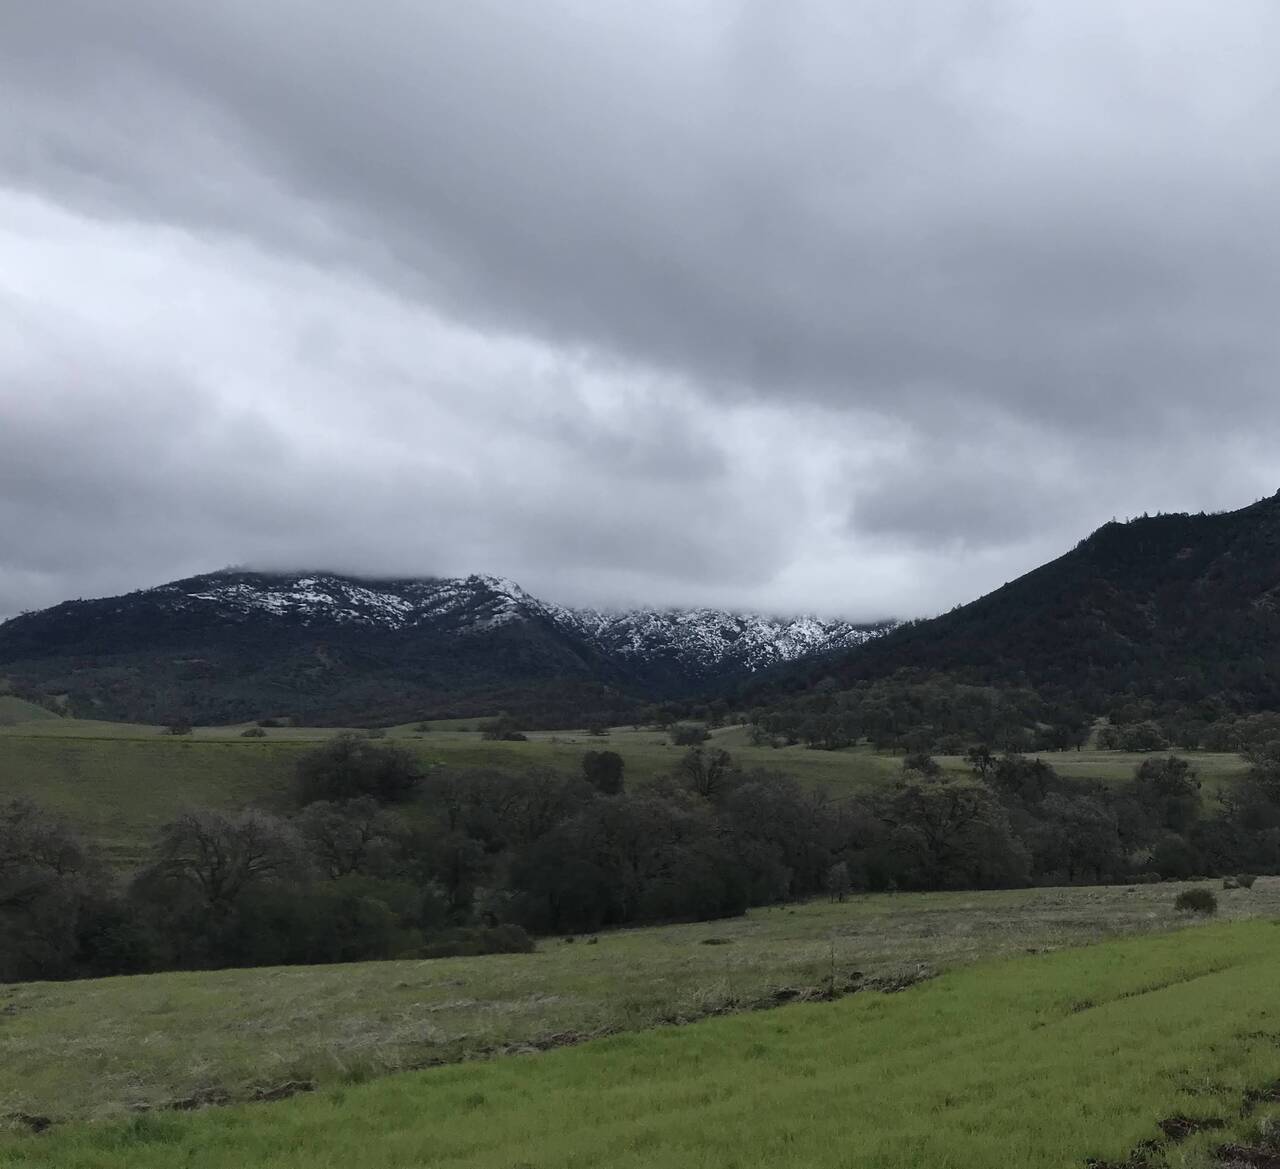 The lower slopes of Mount Diablo covered in snow, the upper hidden in the clouds